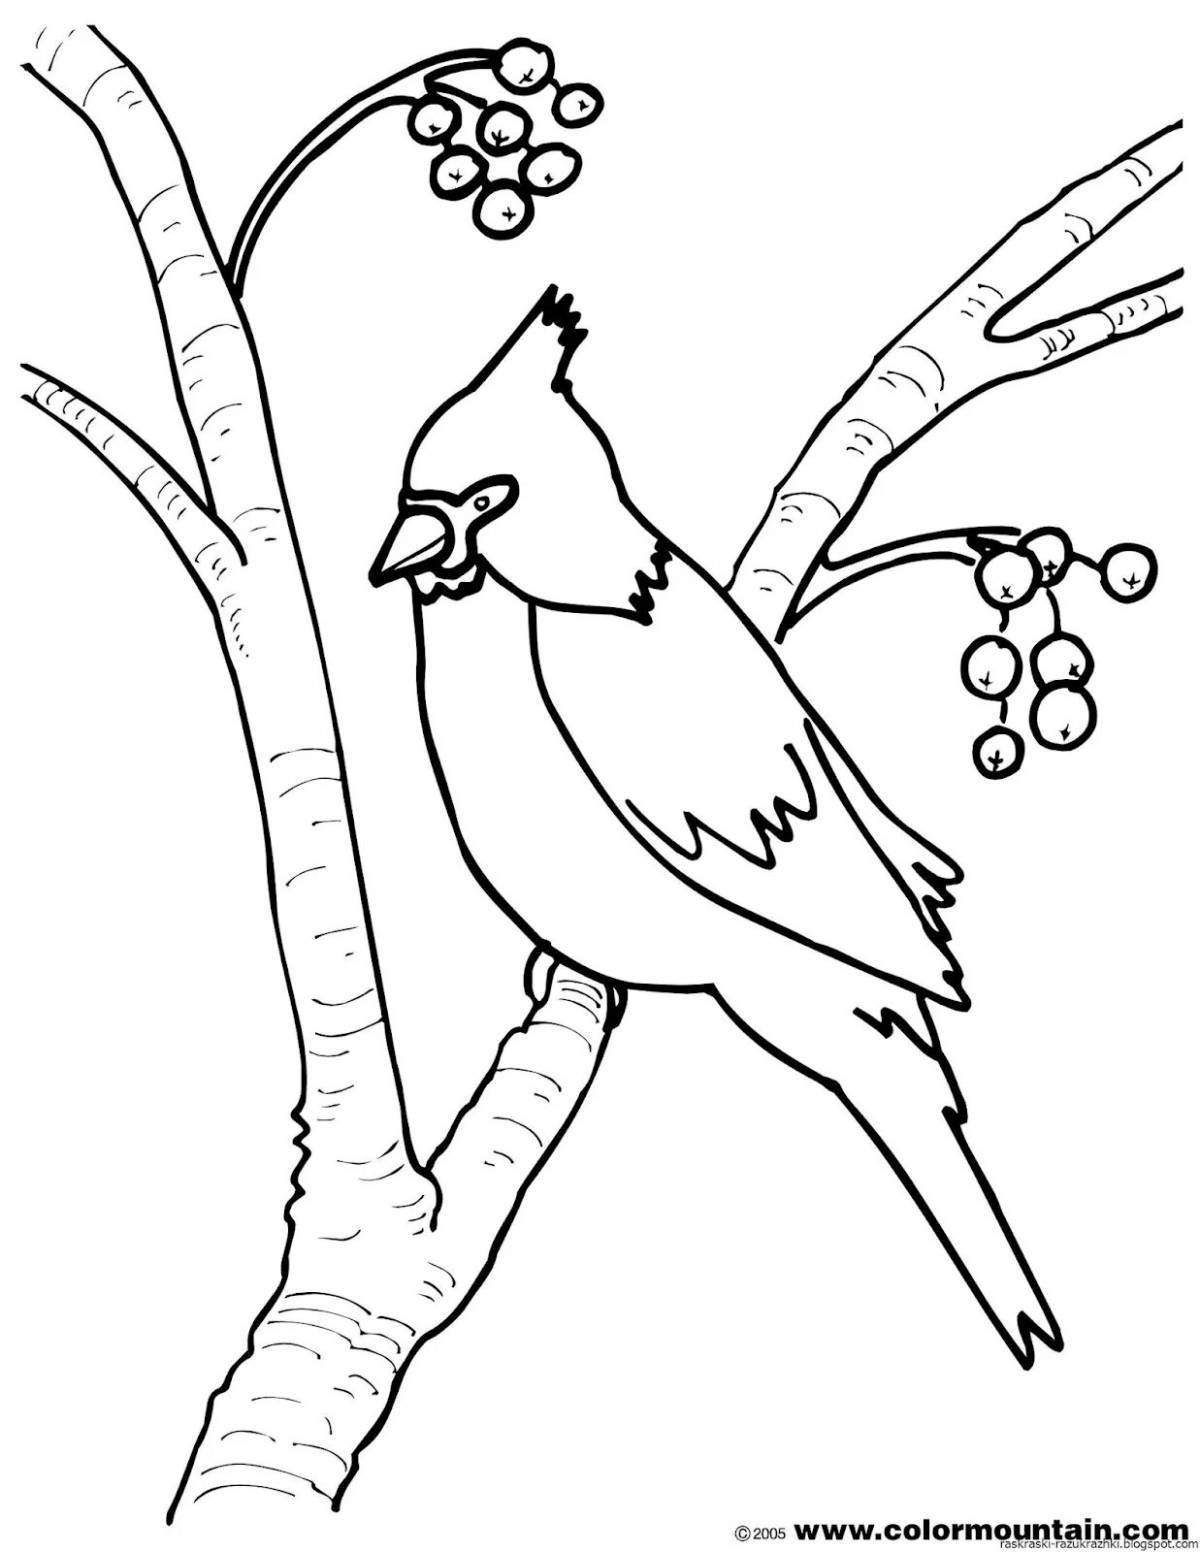 Shiny bullfinch coloring for children 6-7 years old